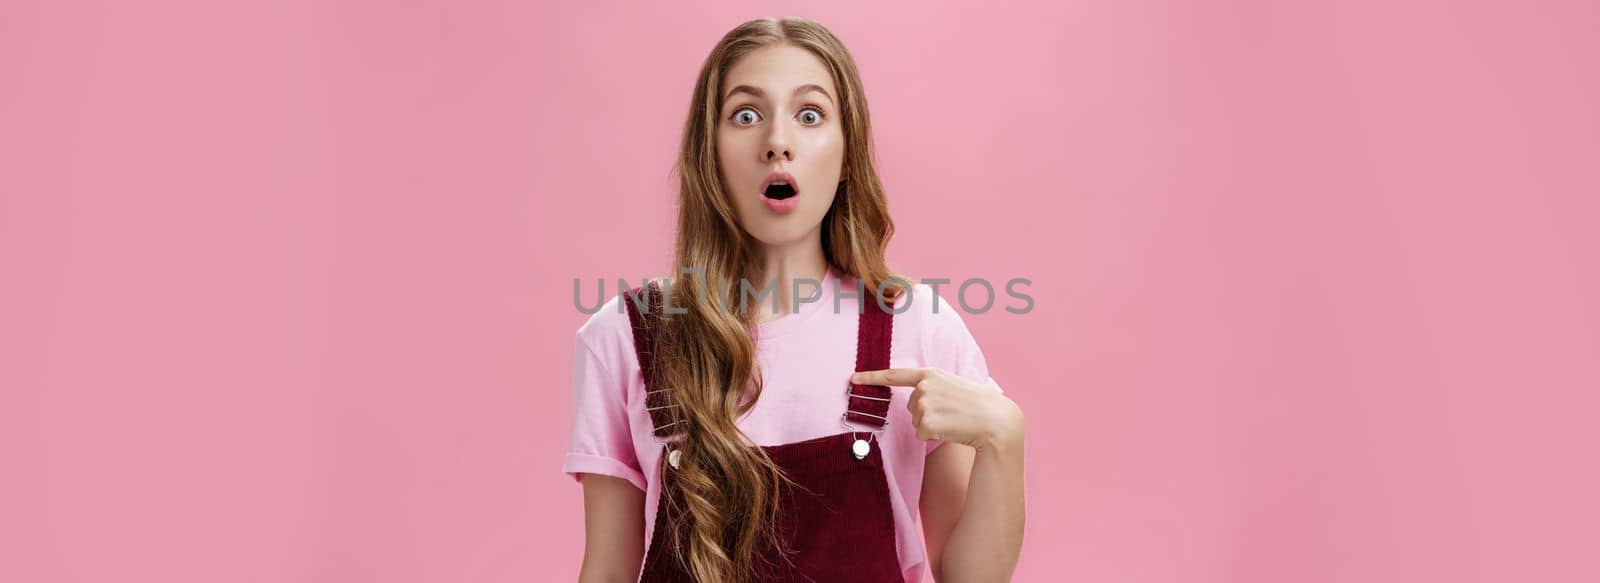 Shocked uncertain and confused charming young woman with tattoos and long natural wavy hair dropping jaw gasping and popping eyes from surprise pointing at herself with unsure expression. Body language concept